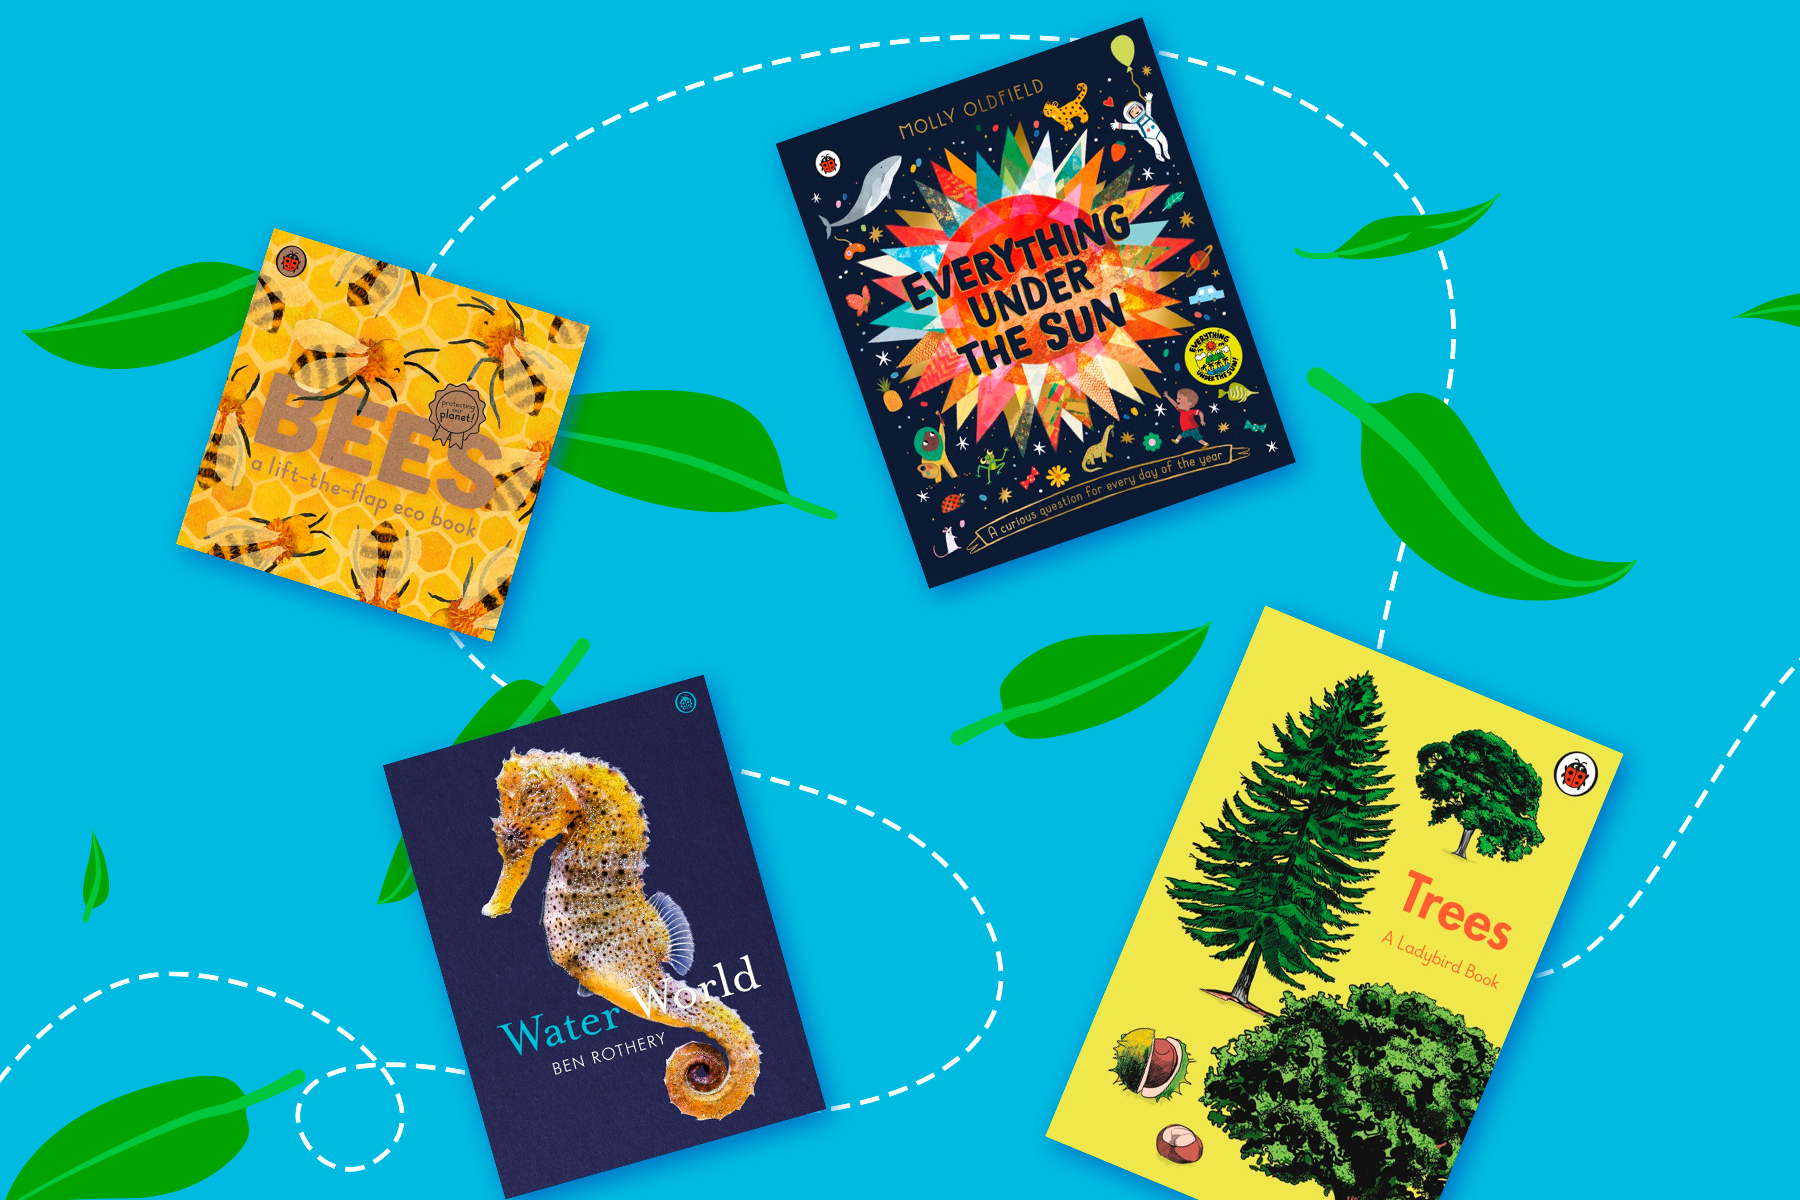 An image of four nature books on a light blue background withe green leaves